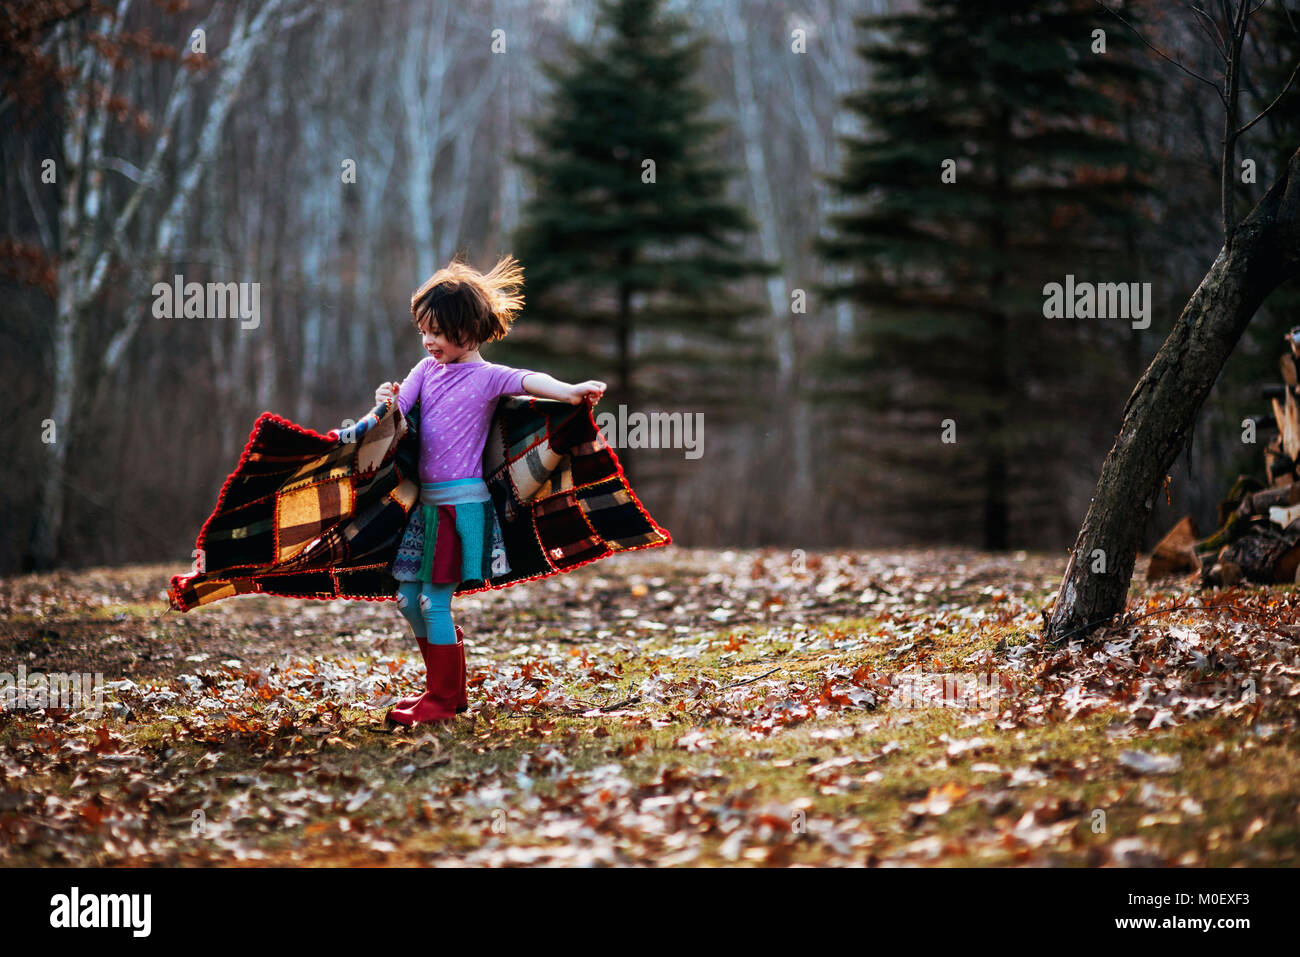 Girl wrapped in a blanket spinning around in forest Stock Photo